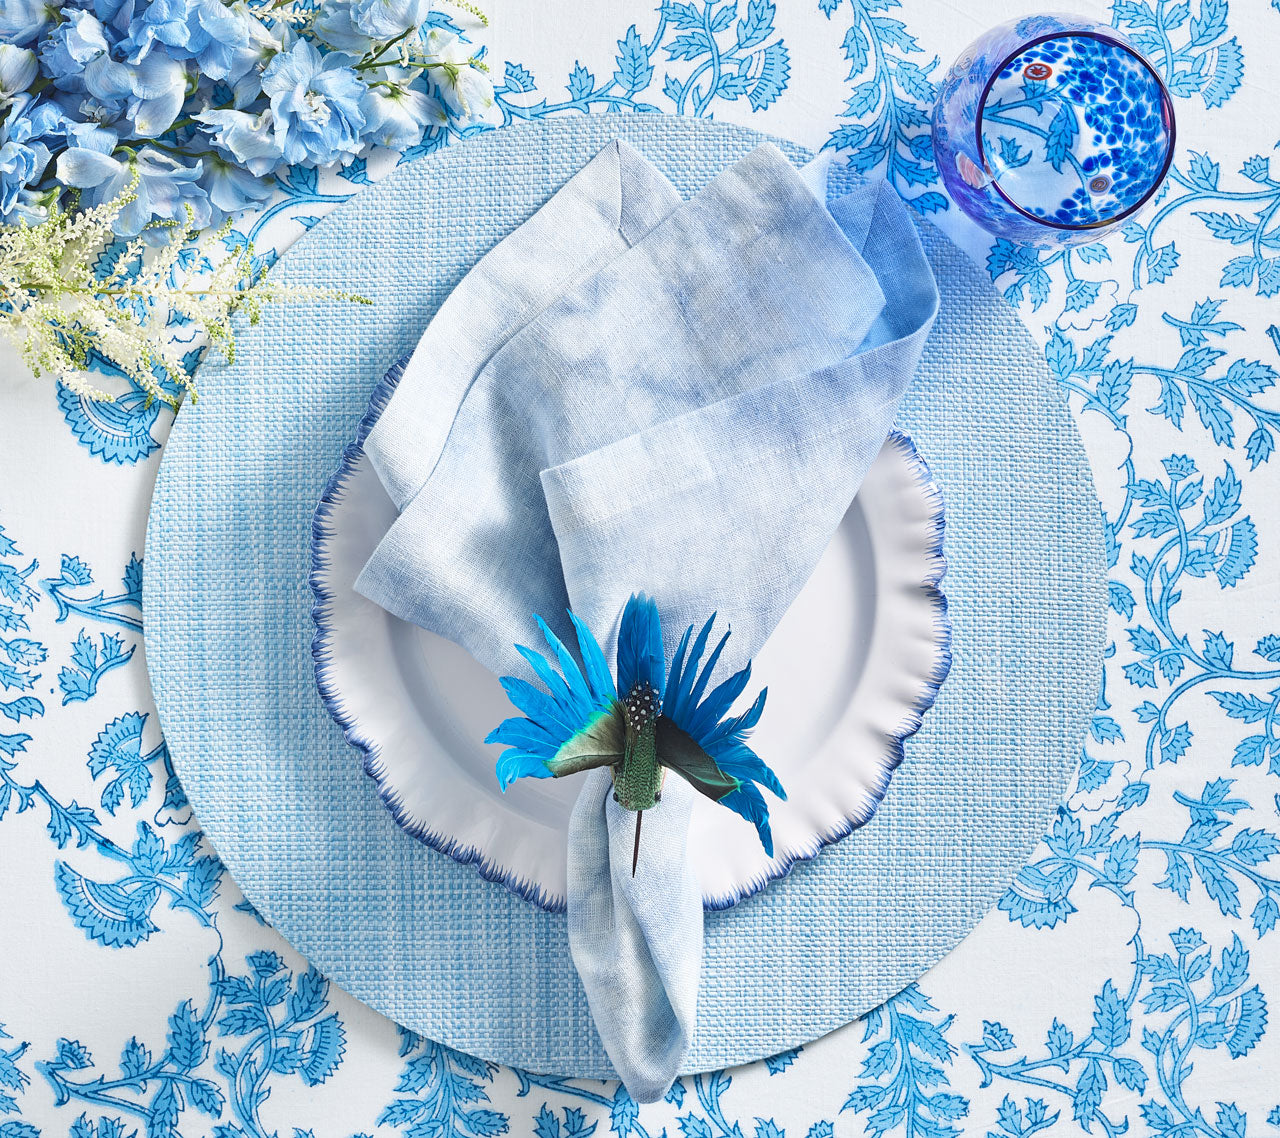 Blue place setting with a periwinkle Portofino Placemat, white plate with blue trim, blue napkin and blue stemless glass